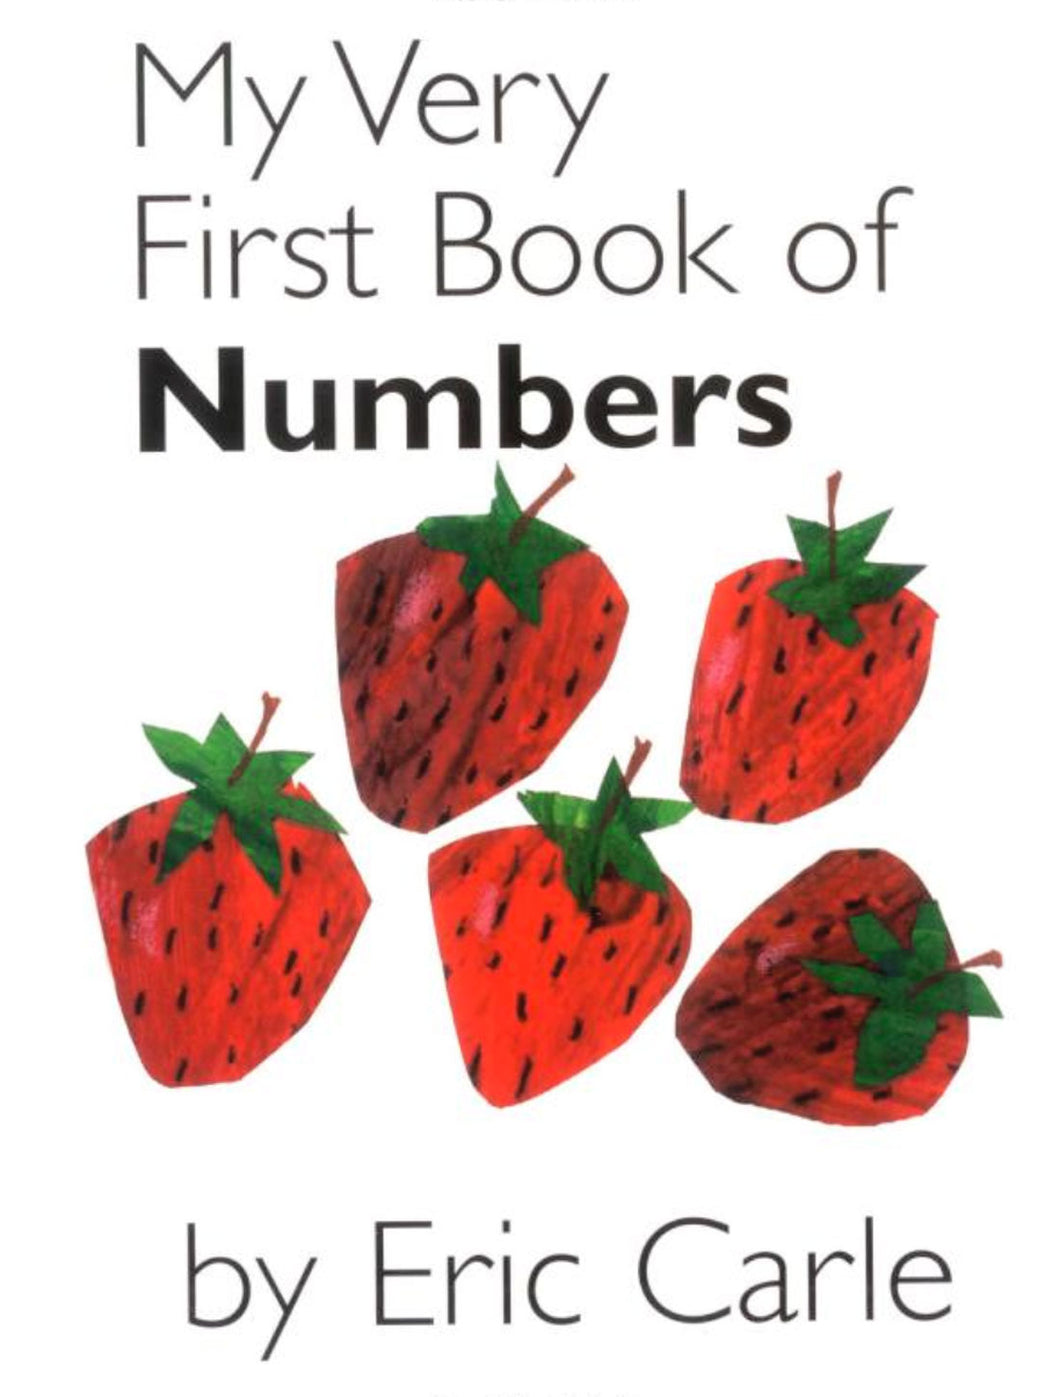 My Very First Book of Numbers by Eric Carle / Board Book - NEW BOOK